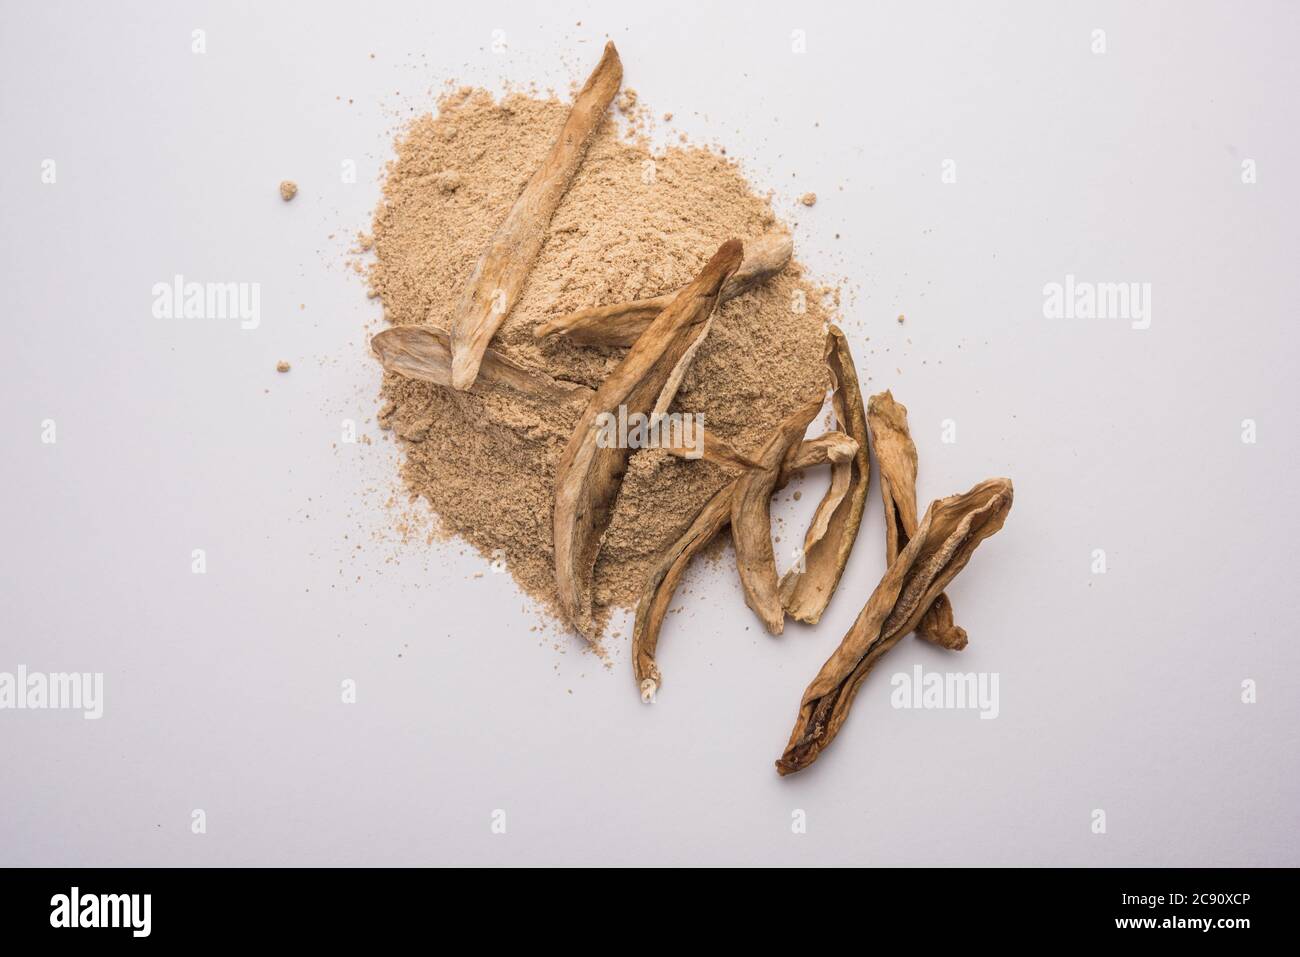 dry mango powder also known as Amchoor or Amchur, it's an Indian Spice with dried fruit Stock Photo